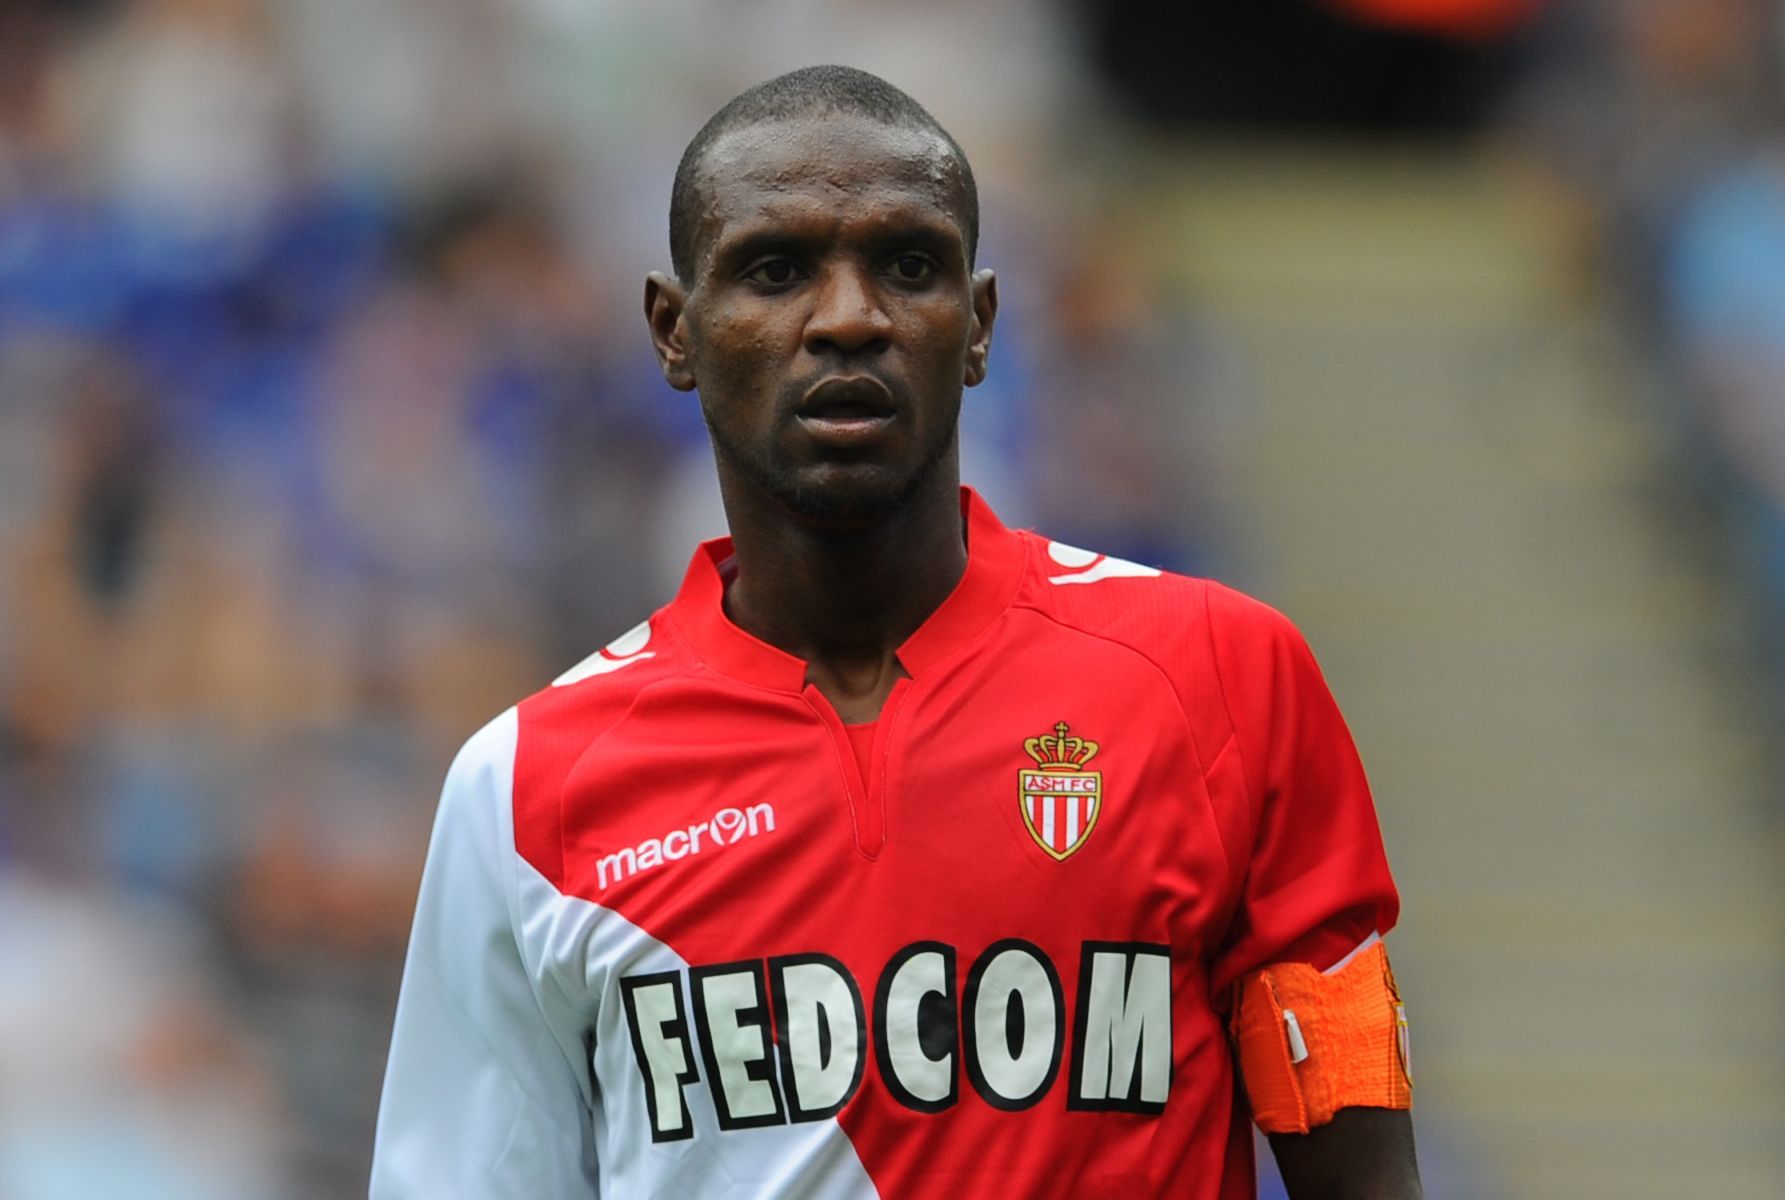 Eric Abidal is one of the best defenders French football has seen in the last 15 years